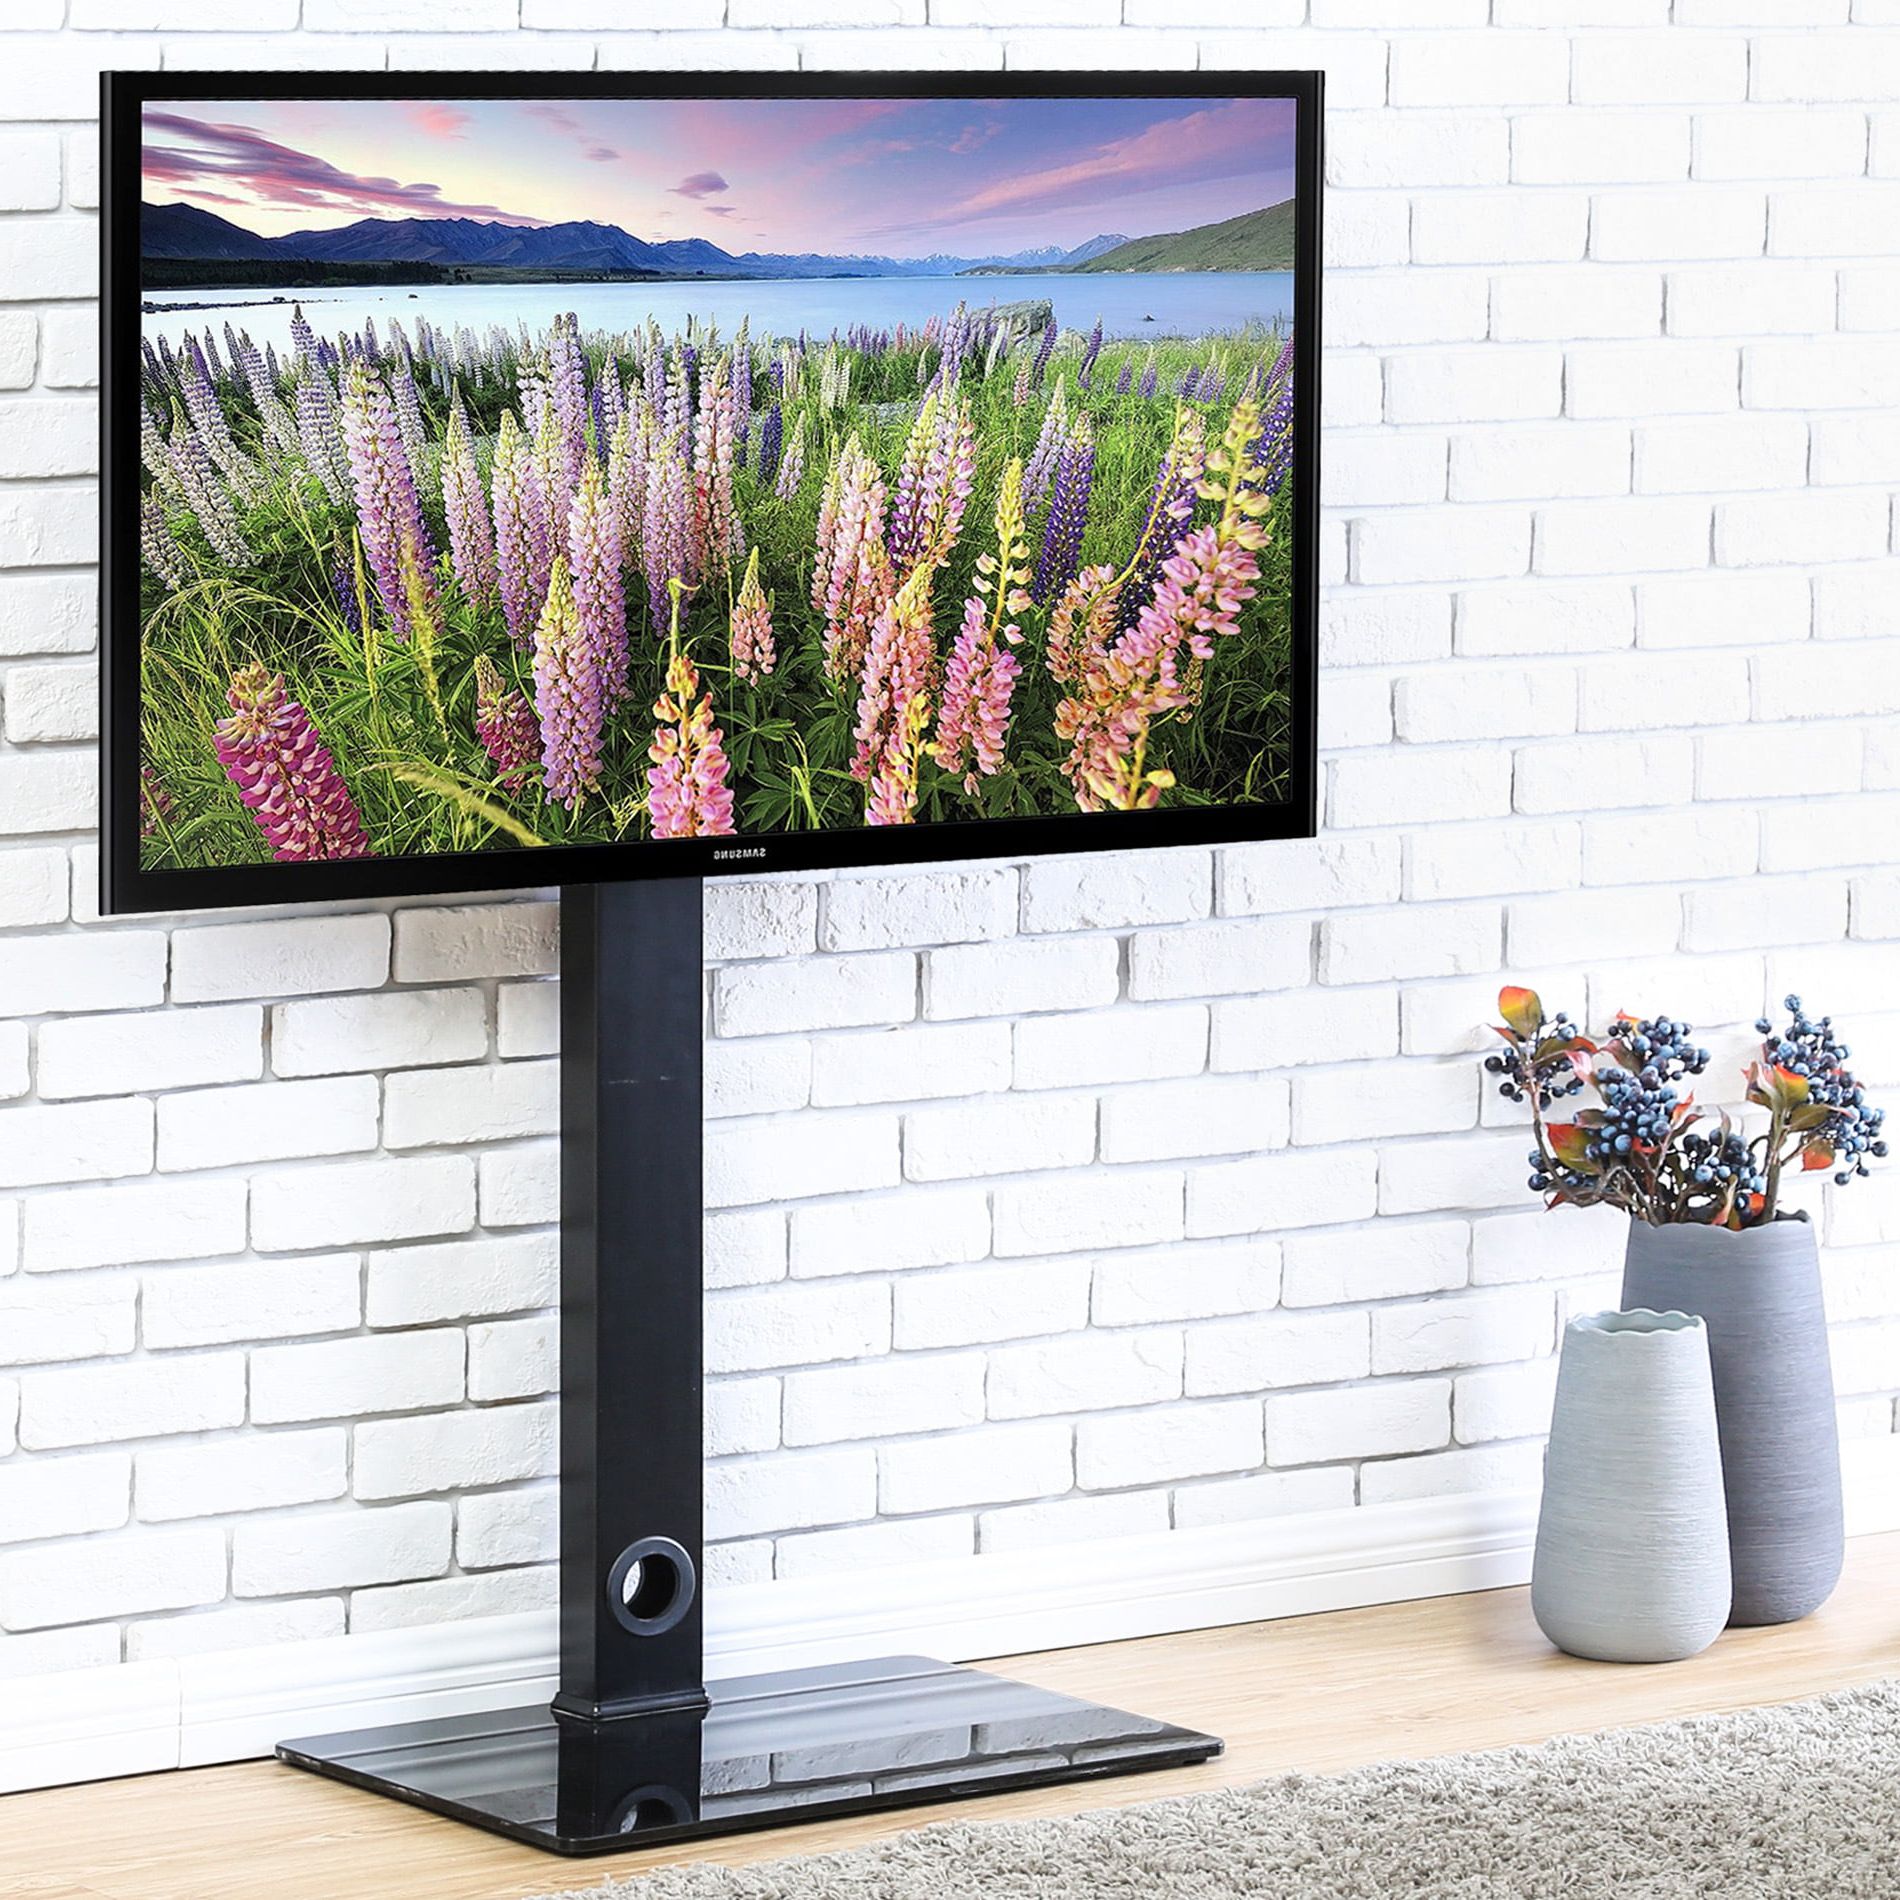 Fitueyes Universal Floor Tv Stand With Swivel Mount, For Most Of 26 To Inside Most Up To Date Led Tv Stands With Outlet (View 6 of 15)